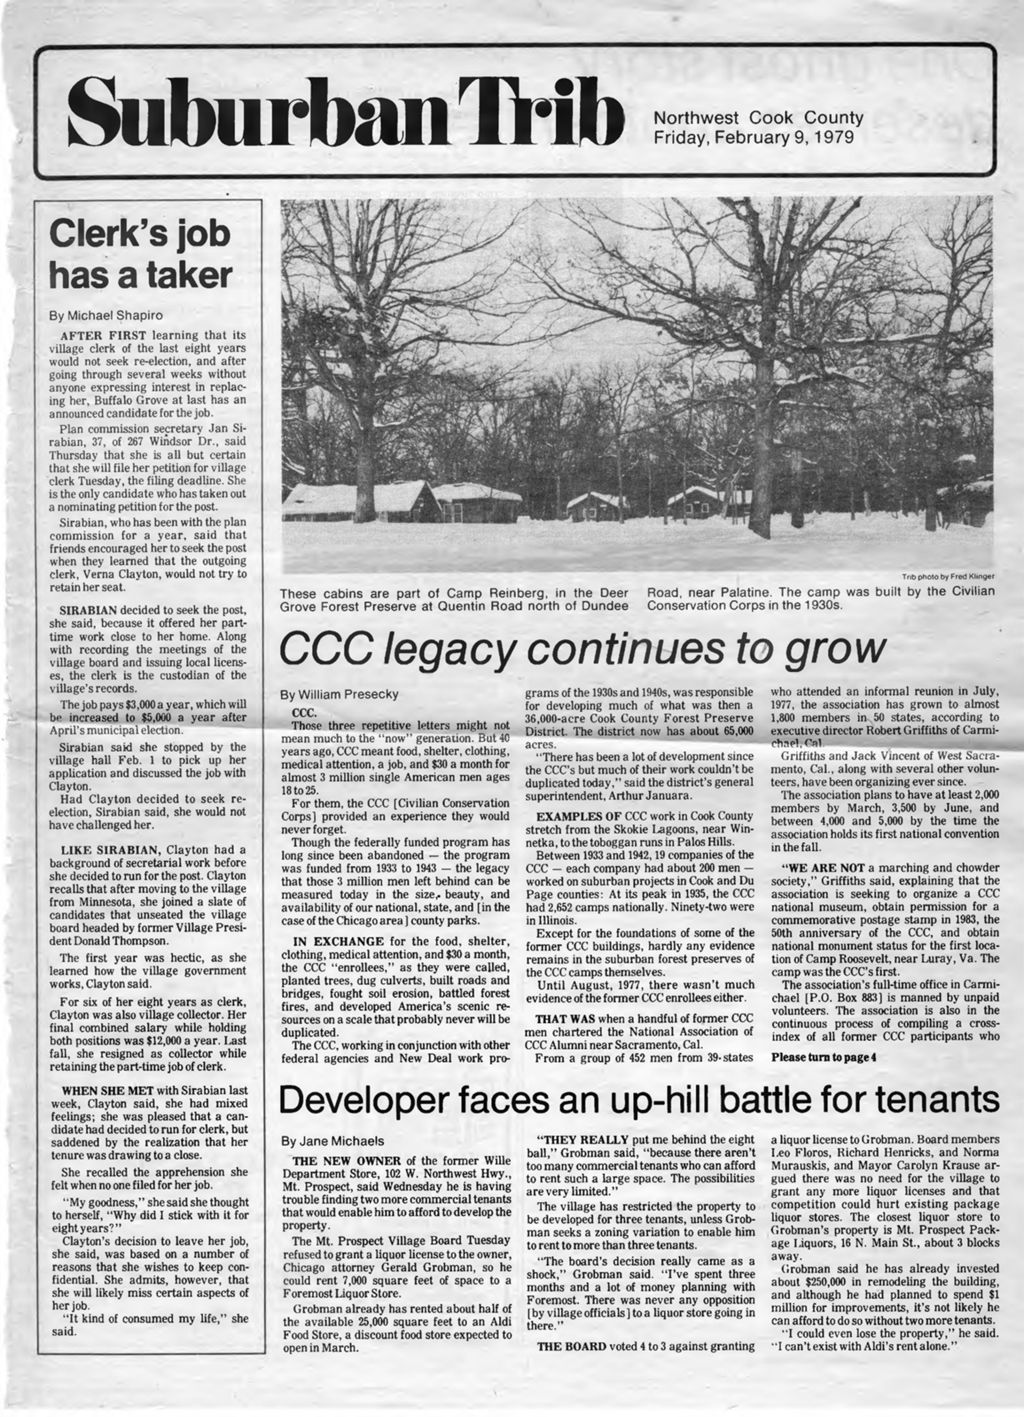 Miniature of Suburban Trib, "CCC legacy continues to grow by William Presecky," 1979